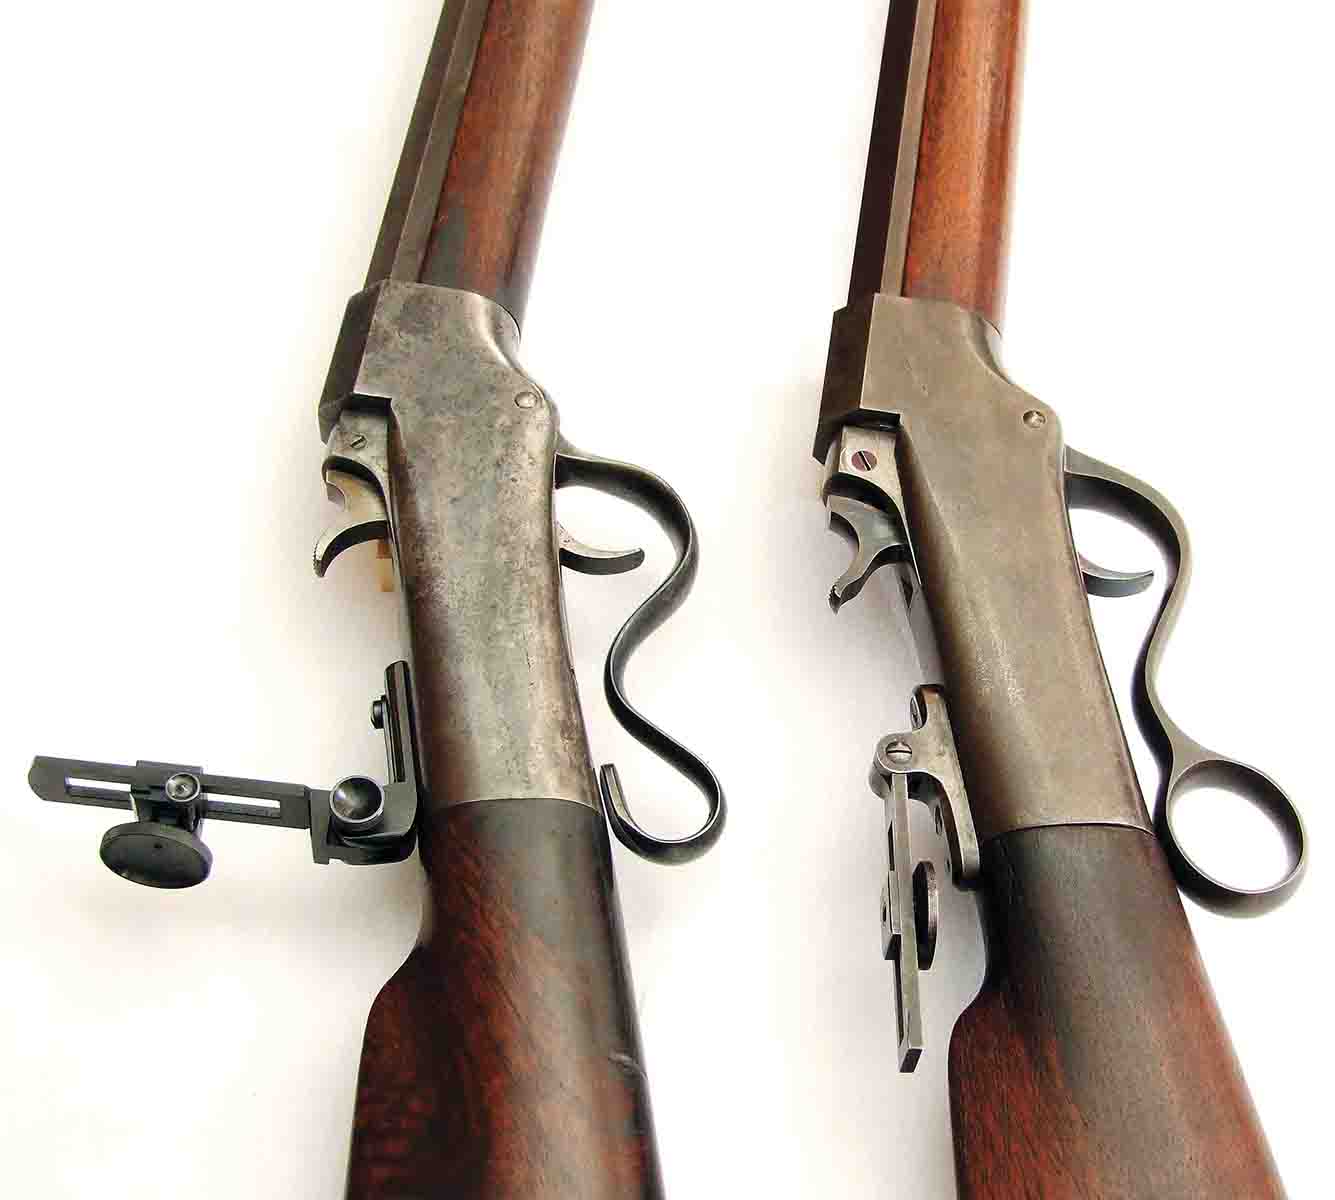 Early Brown No.4 lever on left, later production Marlin Ballard No. 4 ring lever on right. Note different hammer configurations as well.